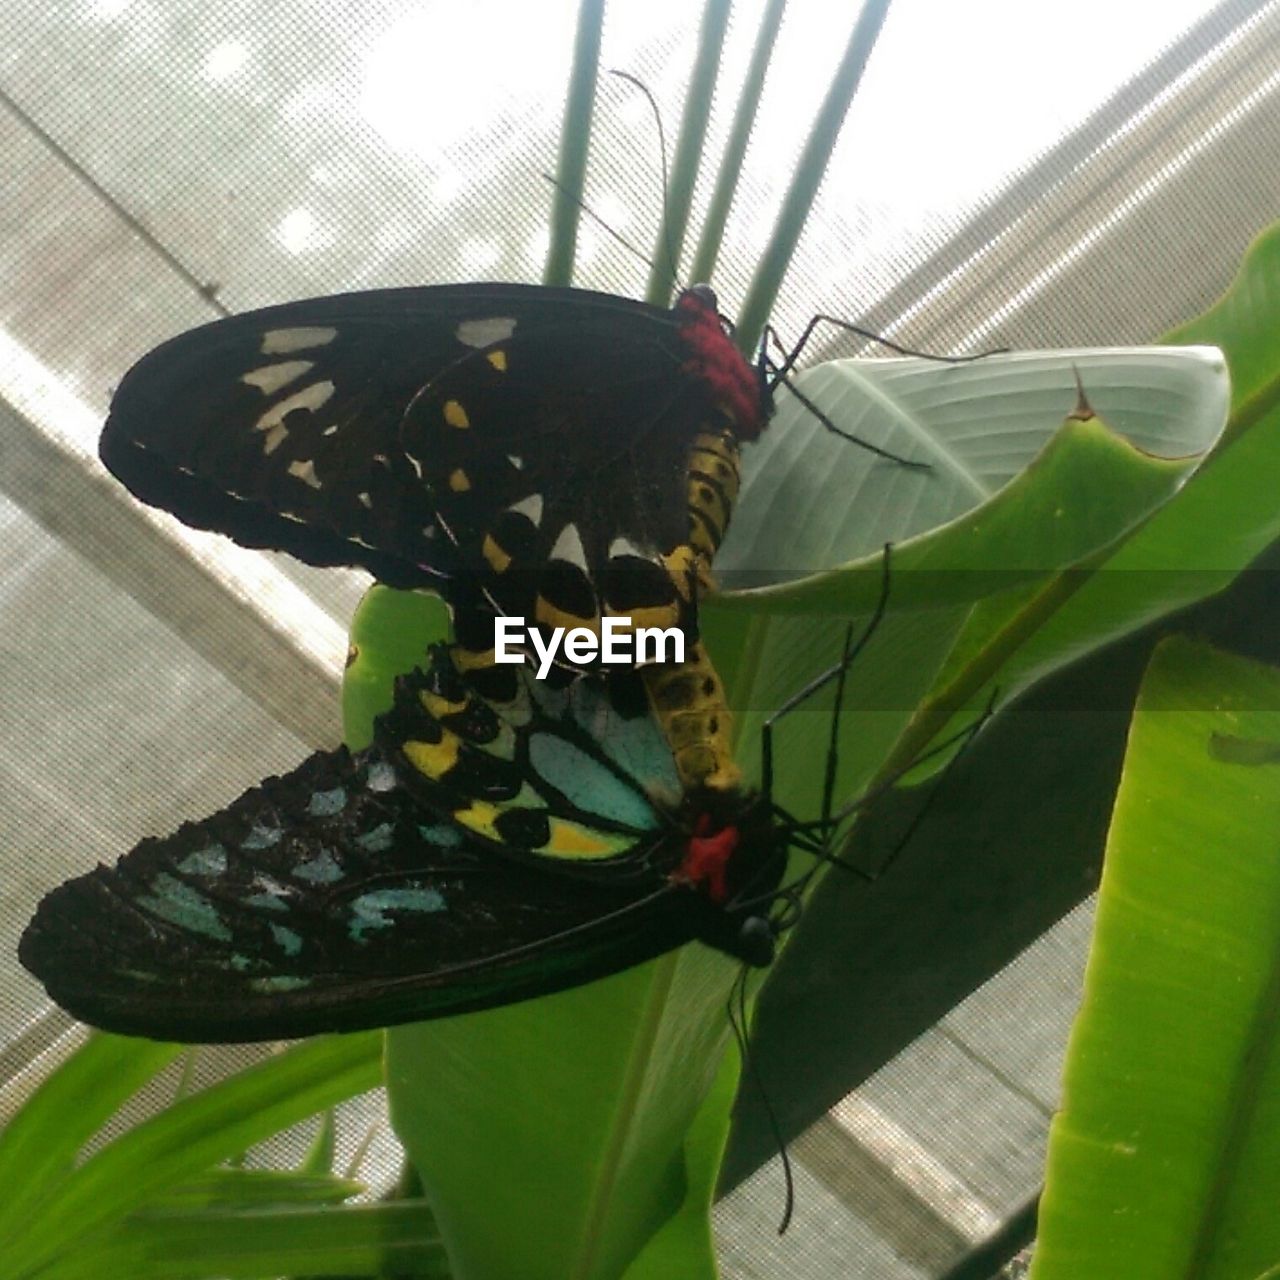 Close-up of butterflies mating on houseplant by window